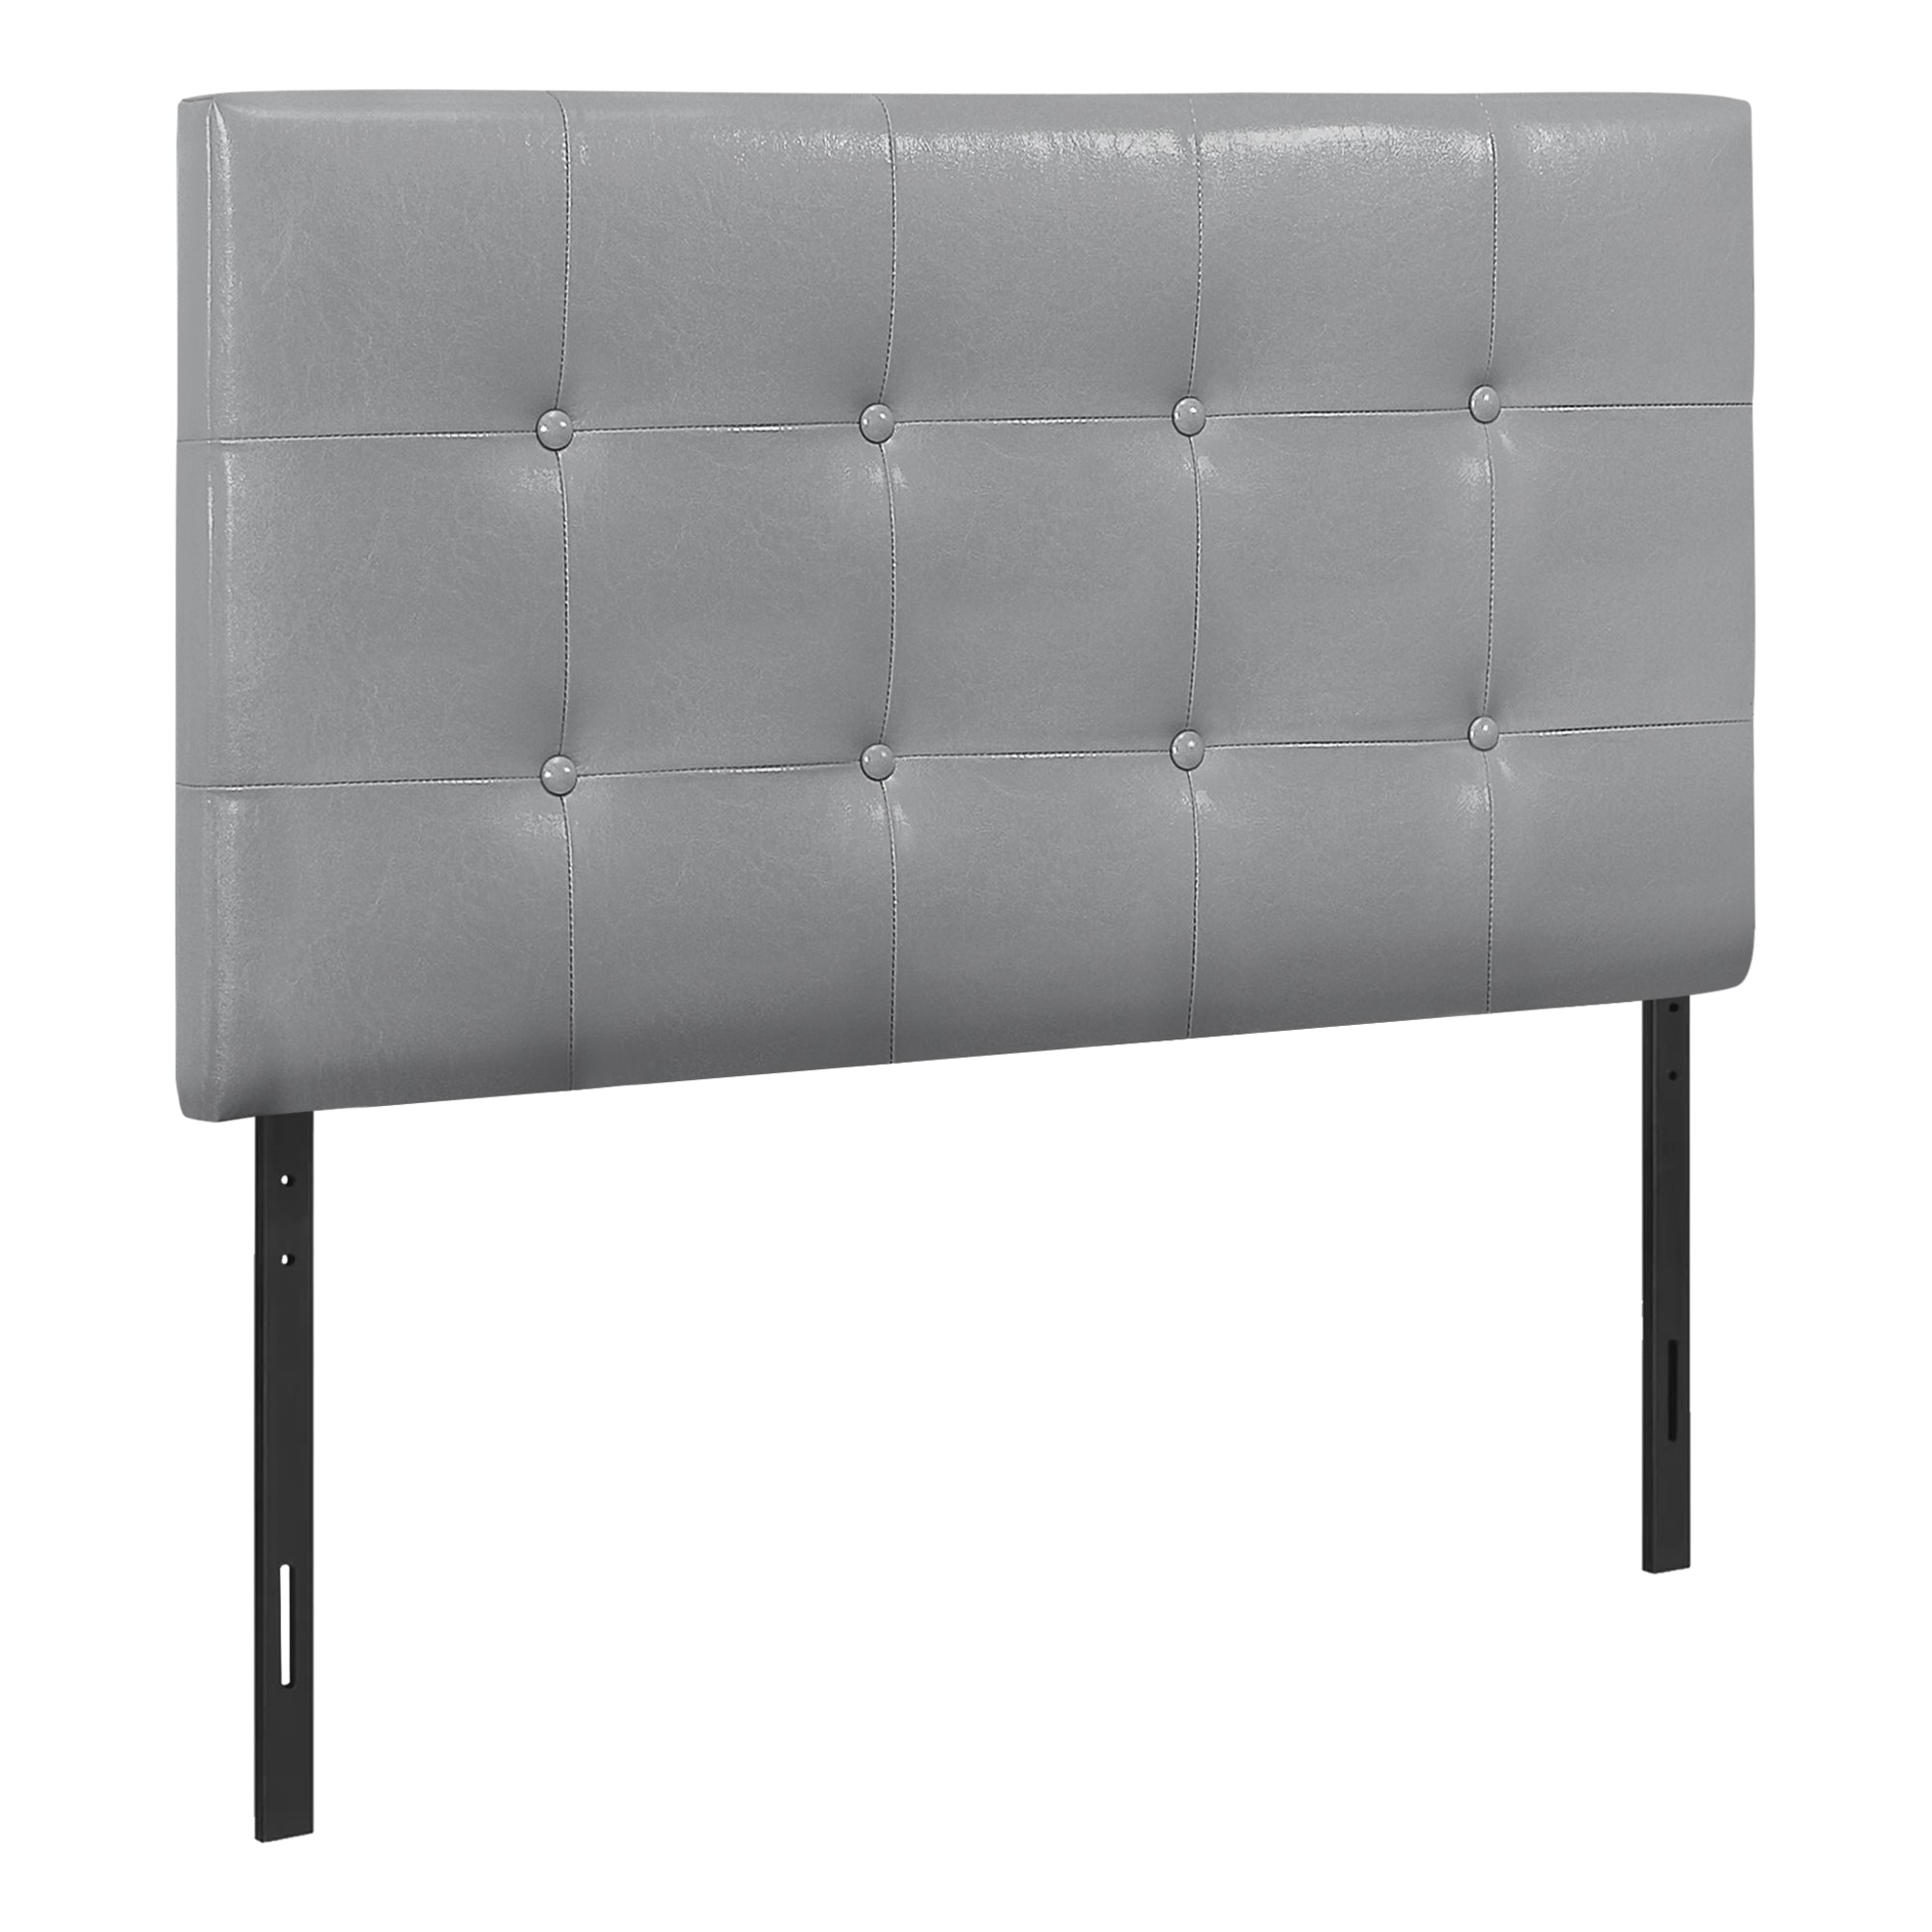 MN-386001T    Headboard, Bedroom, Twin Size, Upholstered, Leather Look, Wooden Frame, Grey, Black, Contemporary, Modern